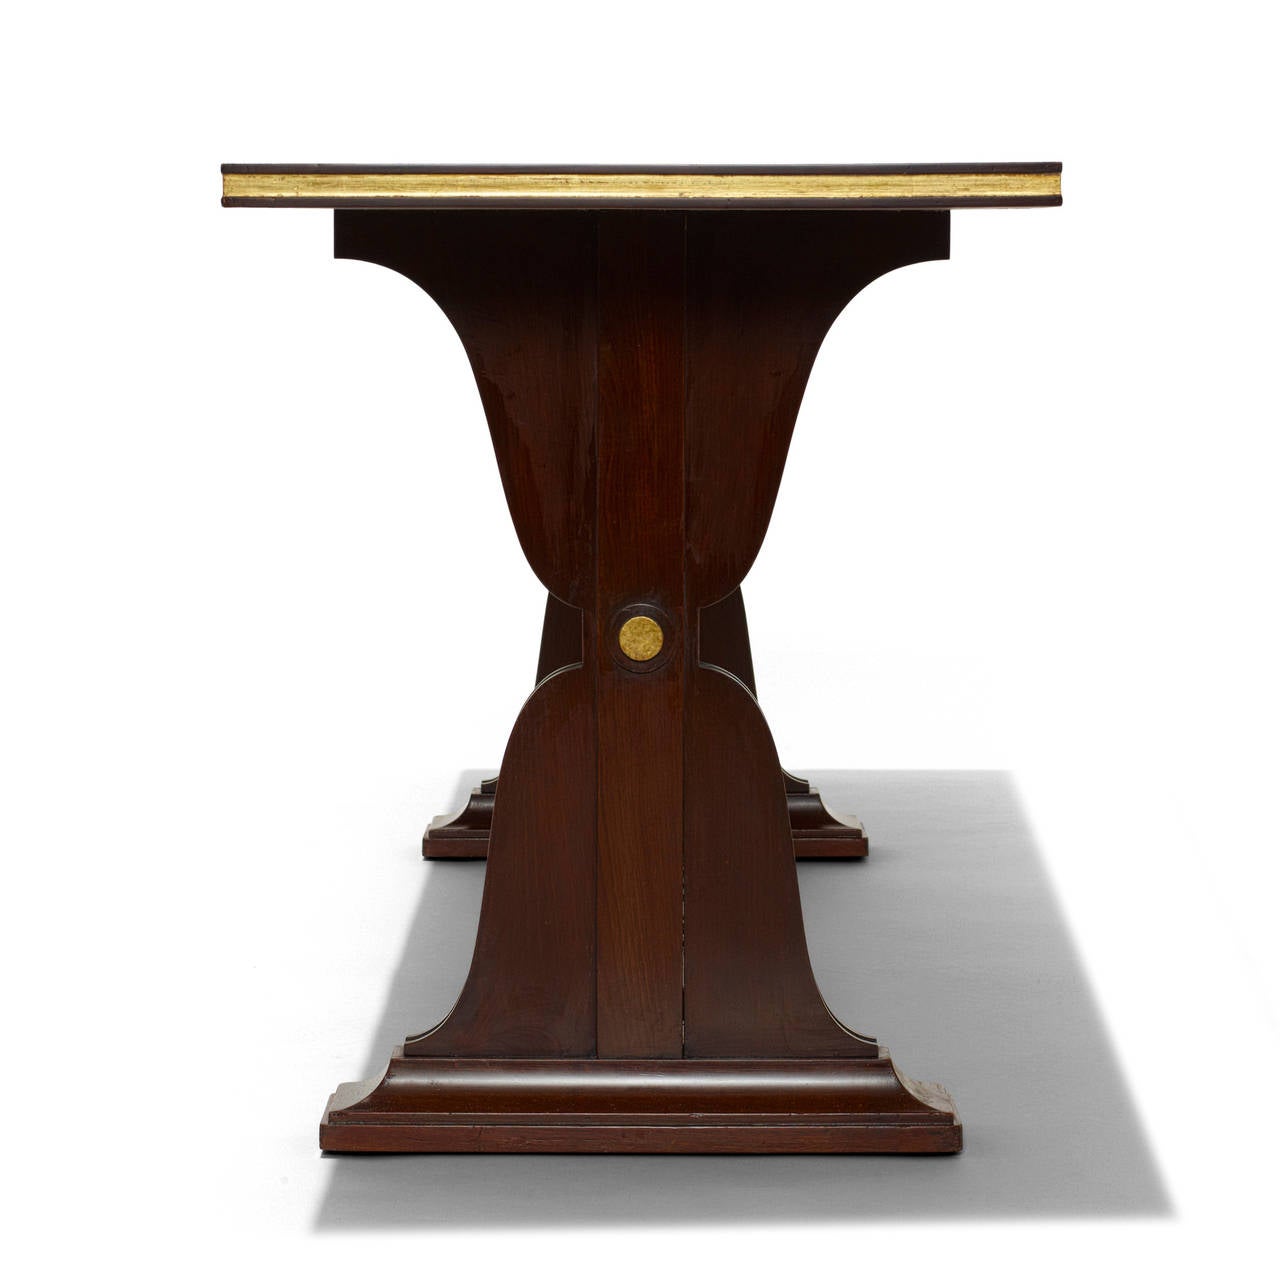 Console or sofa table by Maison Jansen, with hourglass or diabolo-shaped pier legs joined by a stretcher and terminating in mitered molding, in Cuban mahogany with partial gilding and brass hardware, France, 1930s-1940s.
Numbering “68599” impressed